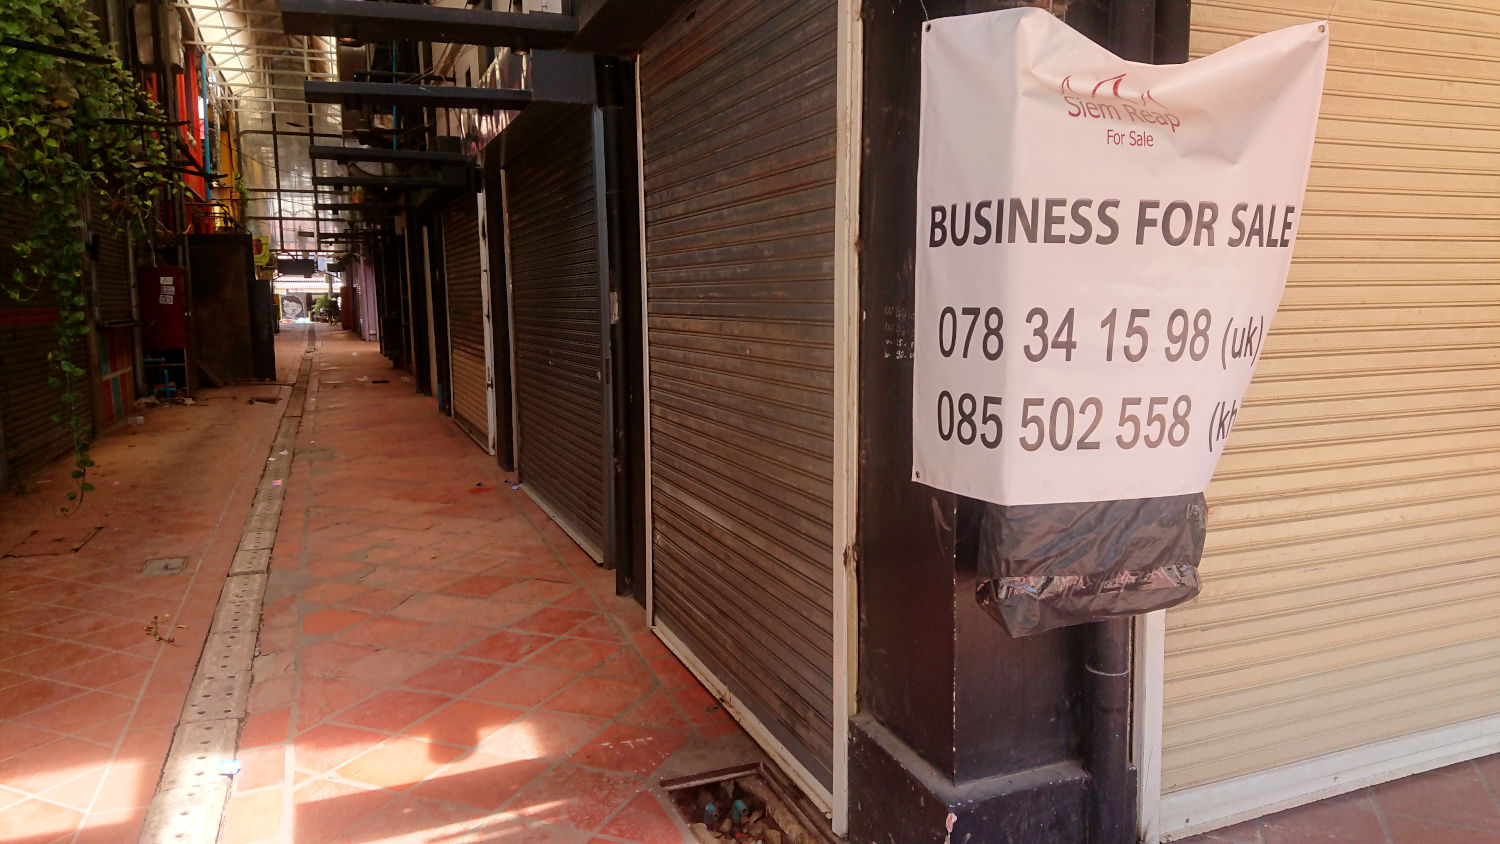 Business for sale, a familiar sign in the town. Many businesses are closed indefinitely, or on sale. Pub Street, Siem Reap